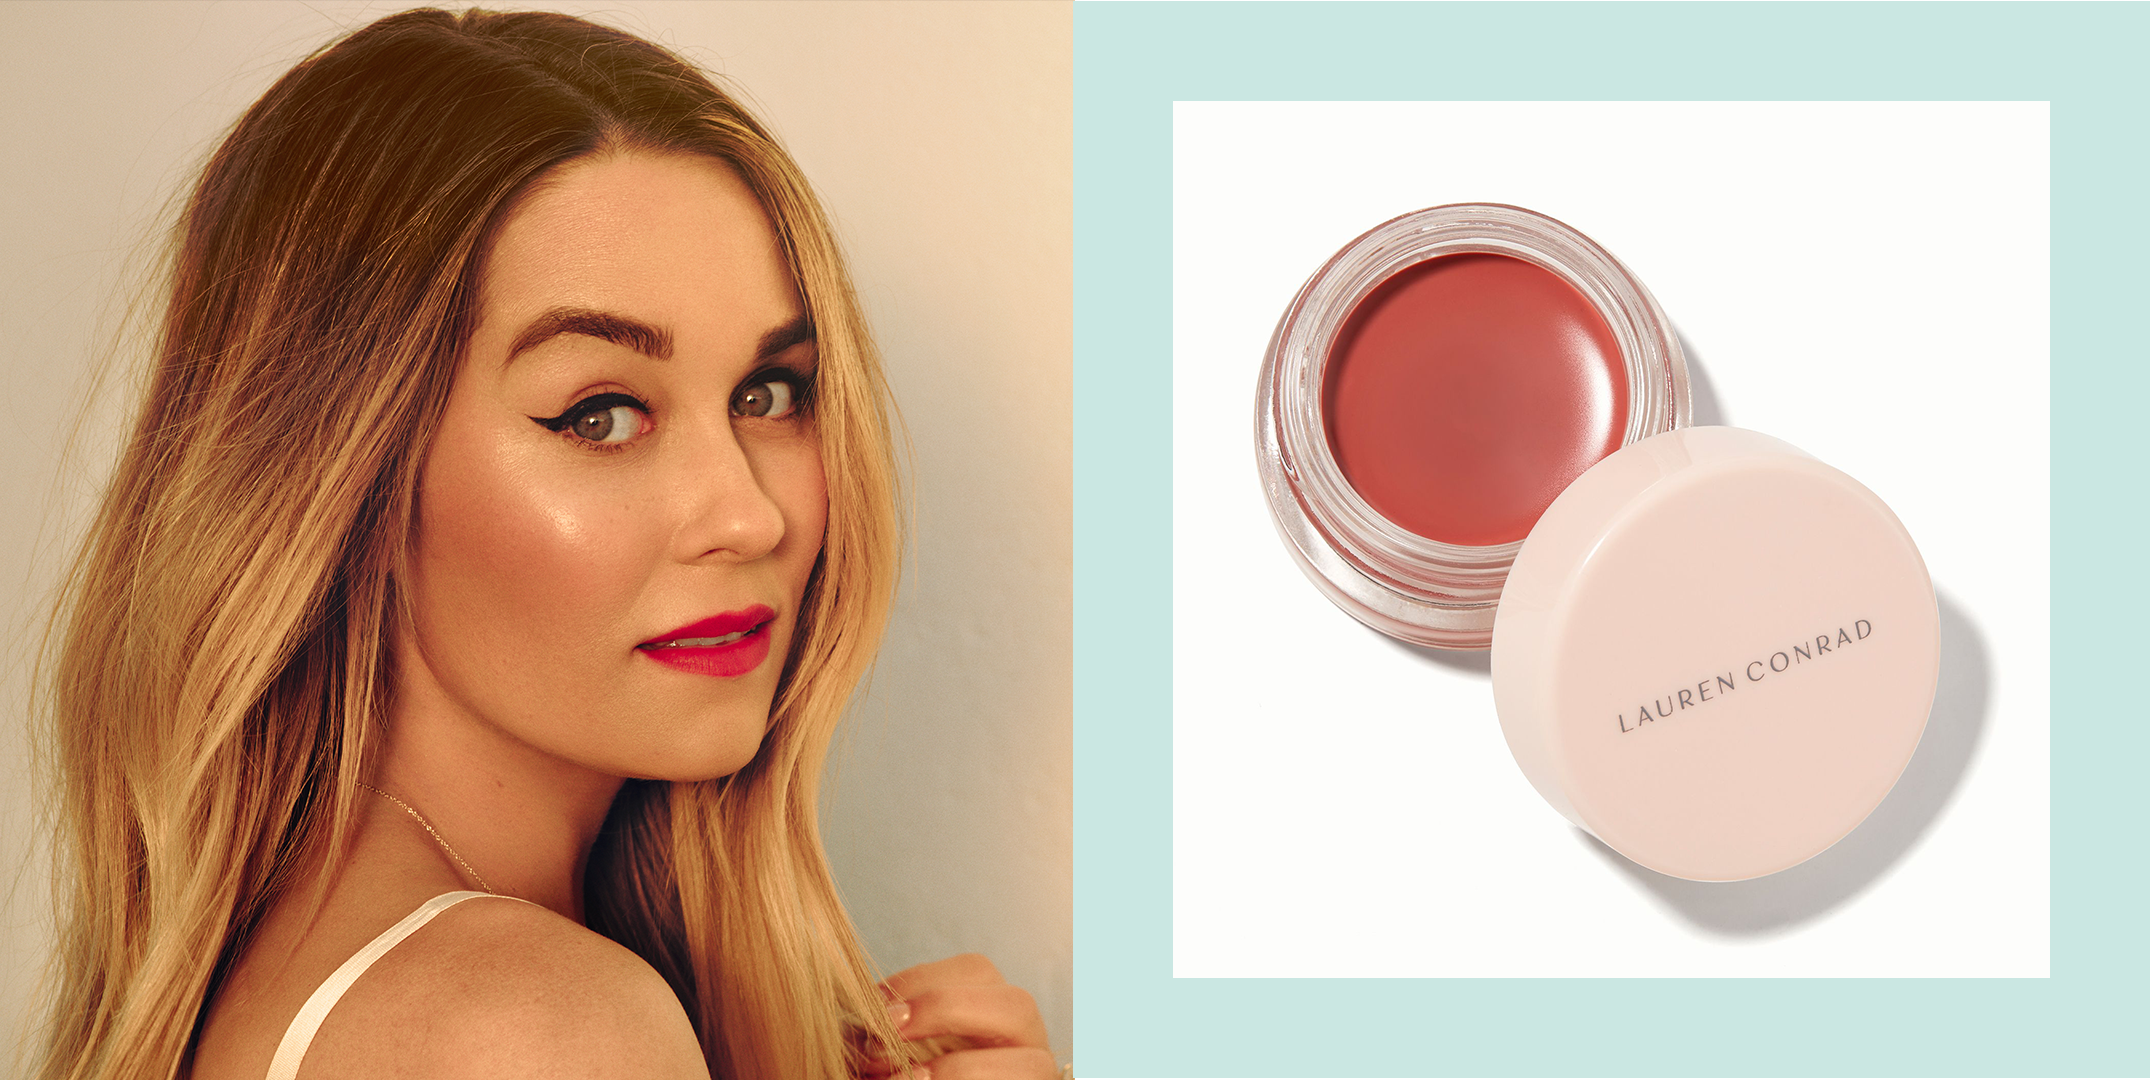 Lauren Conrad's style and beauty